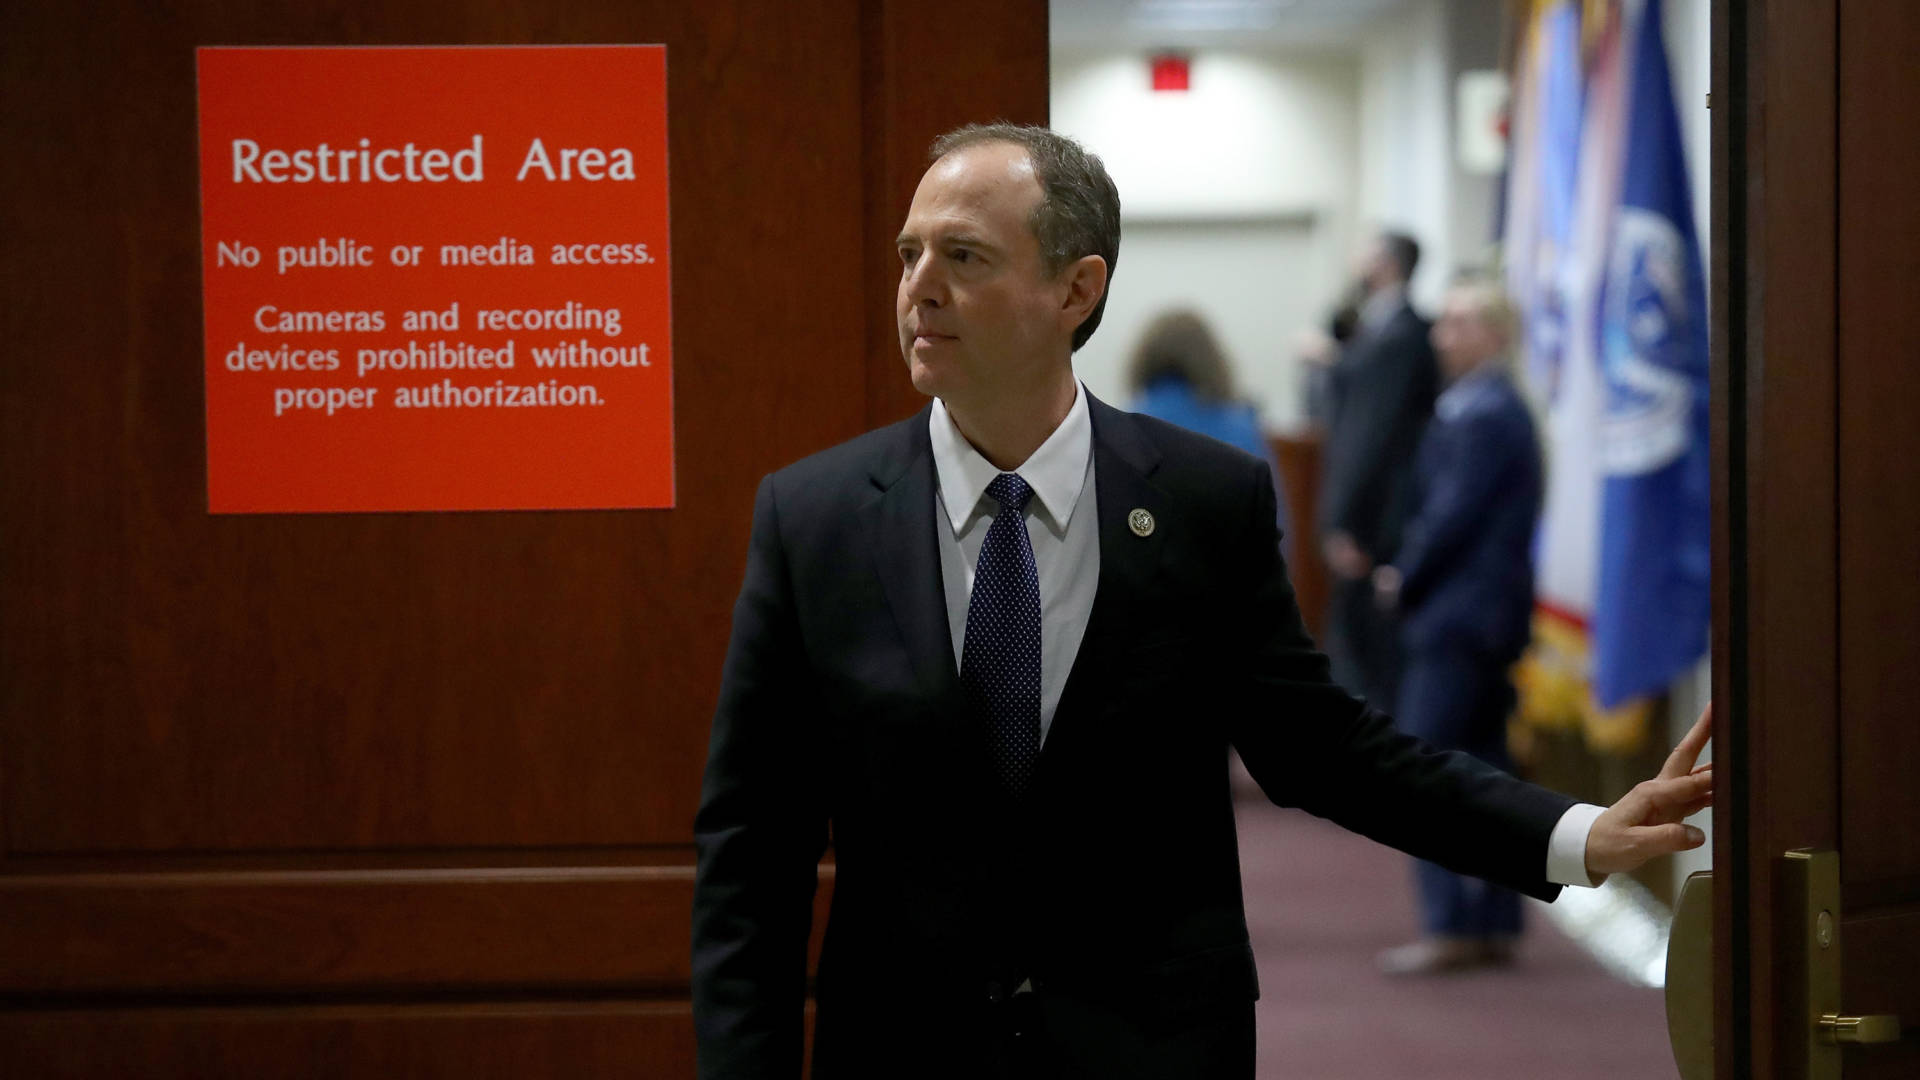 Rep. Adam Schiff, D-Calif., now chairman of the House Intelligence Committee, leaving a committee meeting at the U.S. Capitol on Feb. 5, 2018. Win McNamee/Getty Images